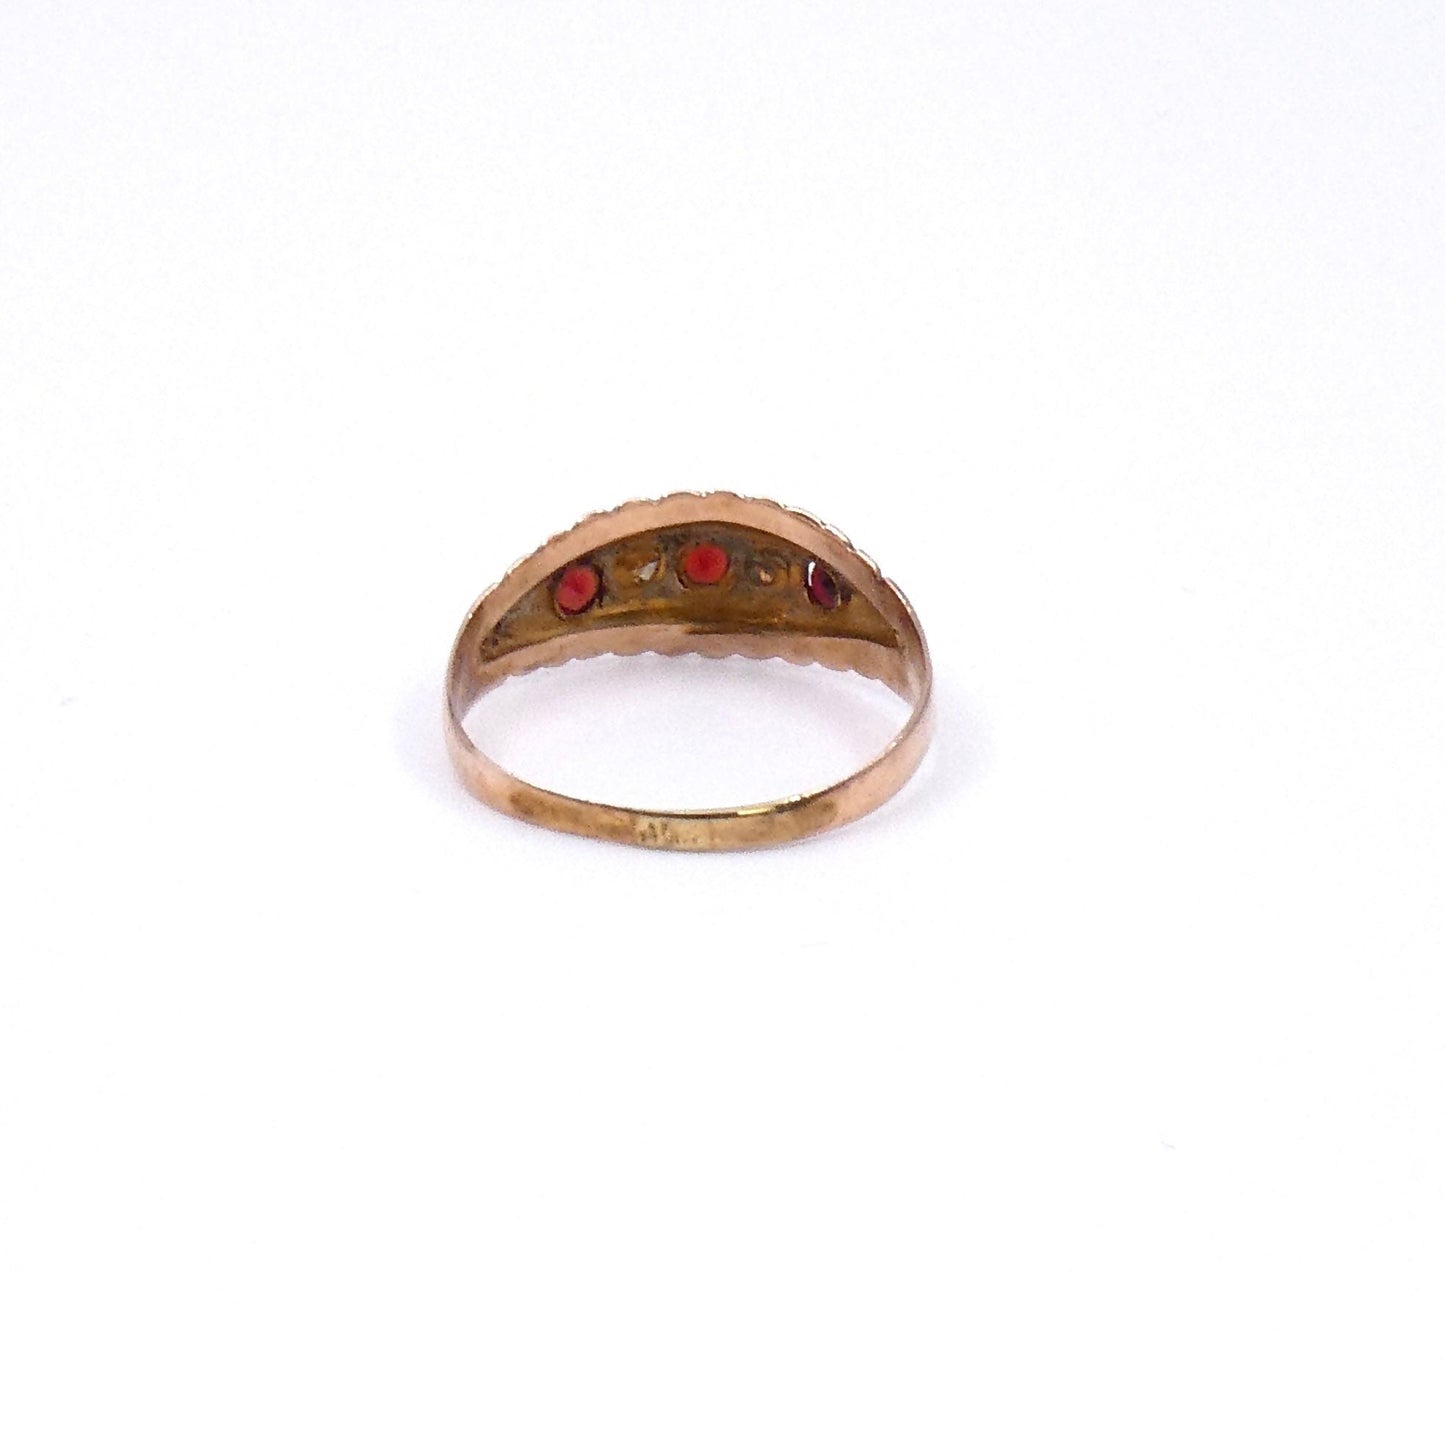 Vintage ring, a garnet pearl gypsy ring in 9kt gold with ornate detailing. - Collected